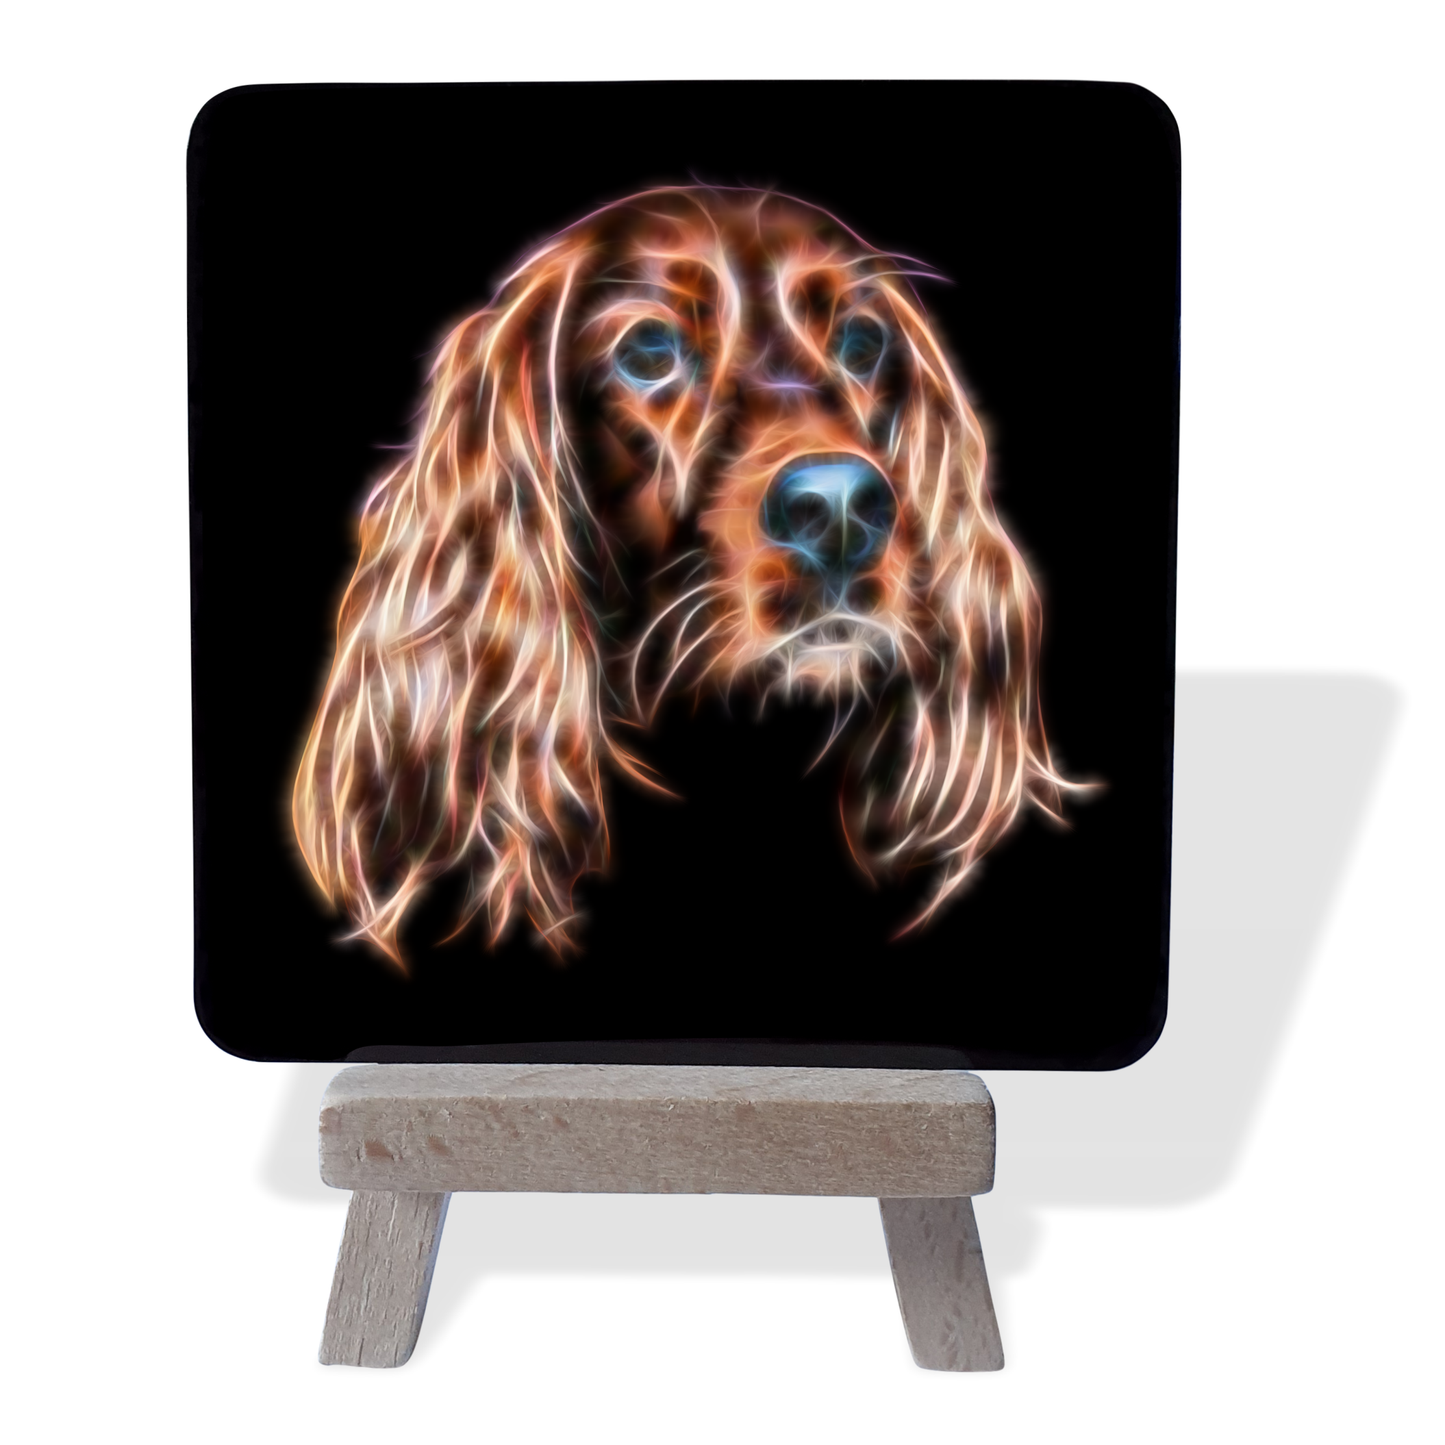 Irish Setter #1 Metal Plaque and Mini Easel with Fractal Art Design